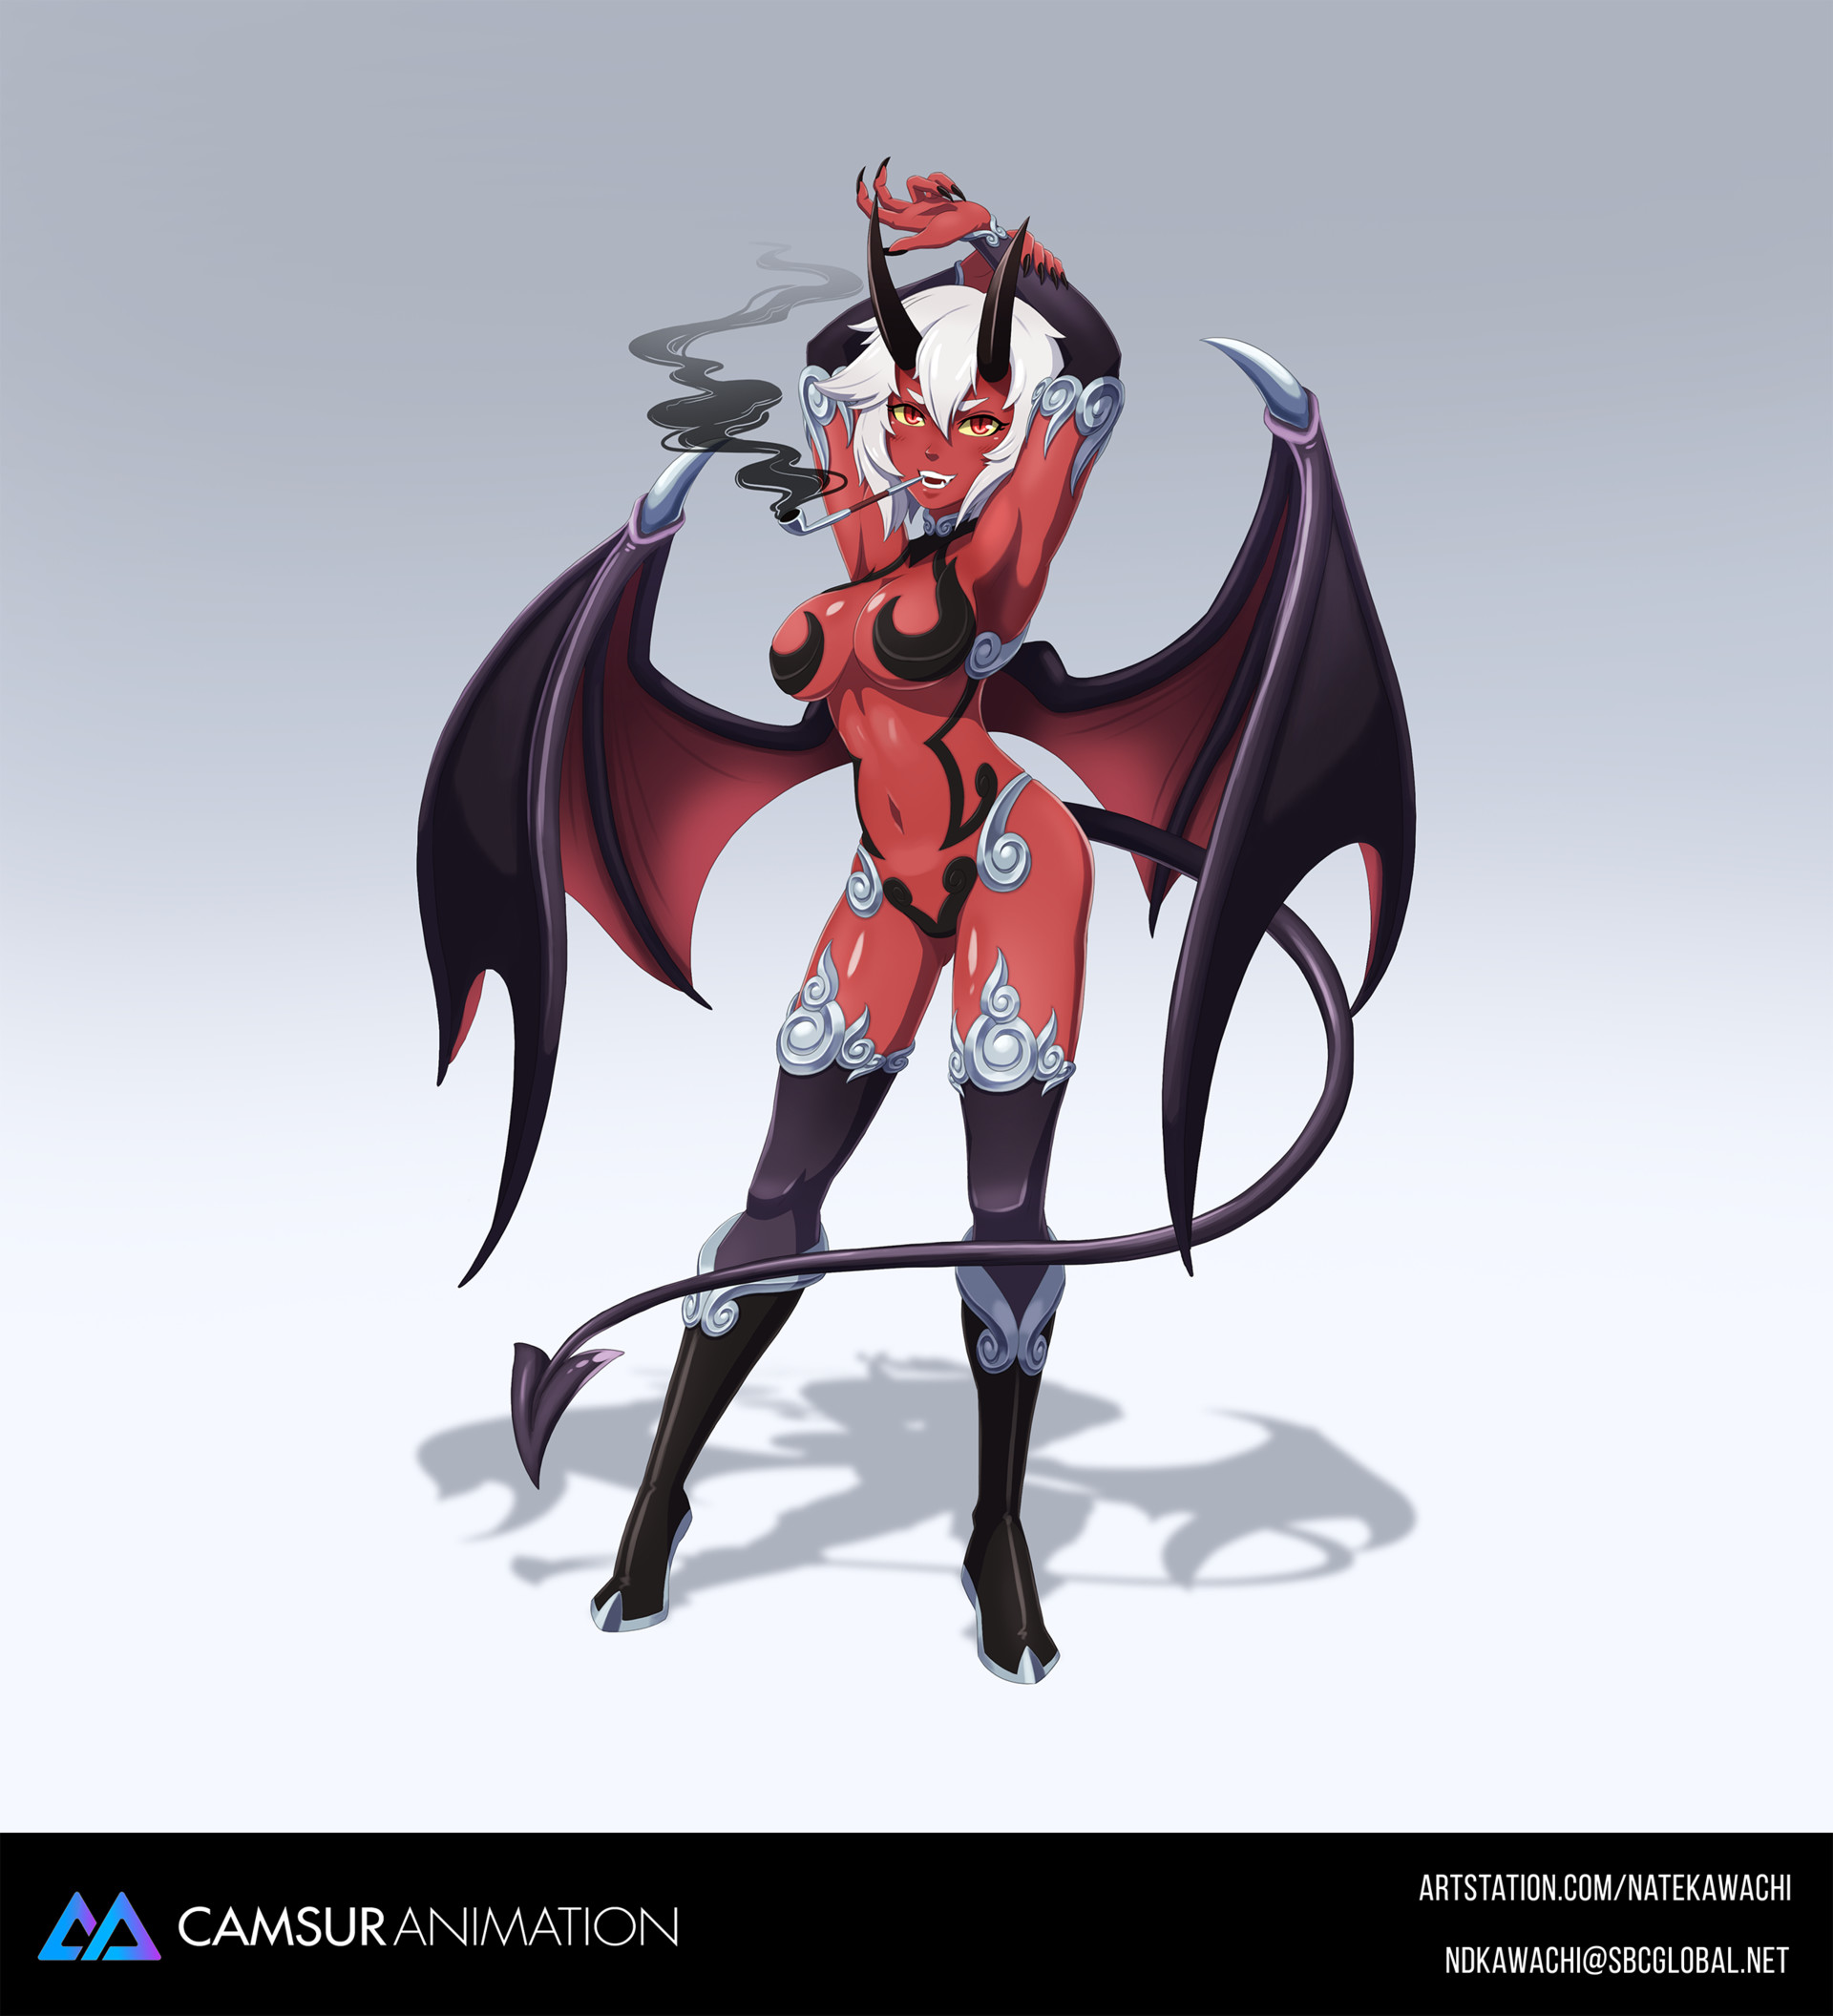 Some succubi concept designs for a demon girl themed slots game that was ne...